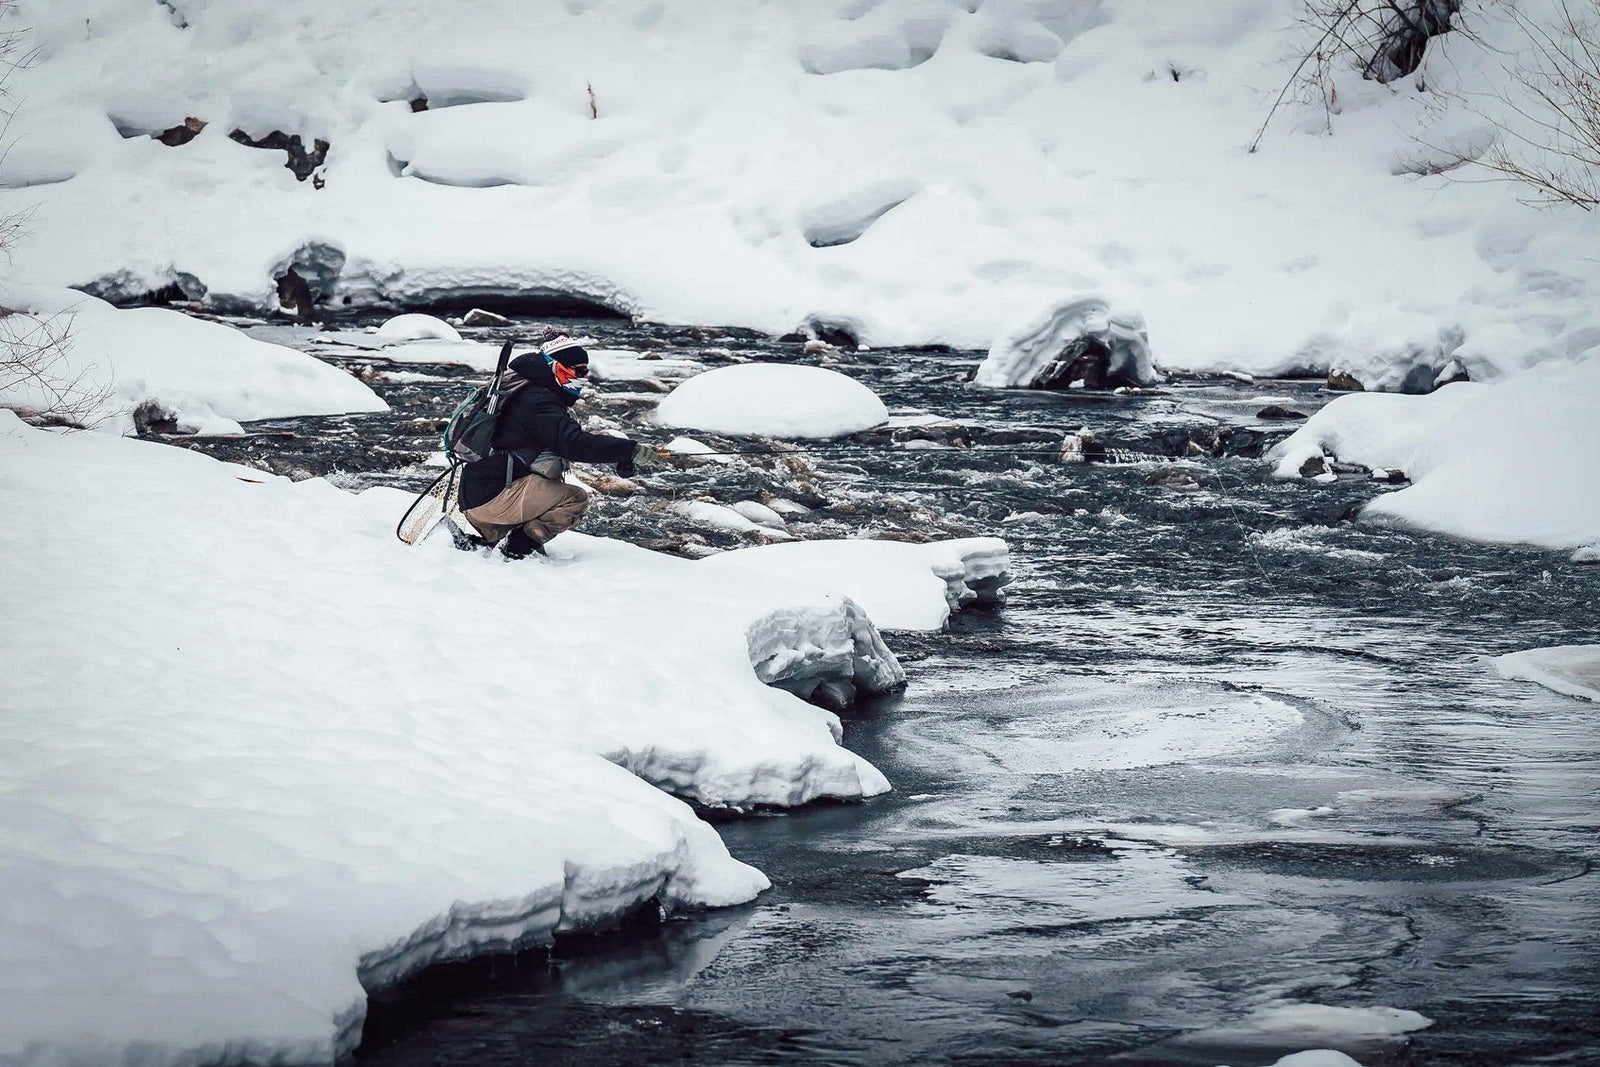 7 Tips To Stay Safe While Fly Fishing This Winter | Jackson Hole Fly Company